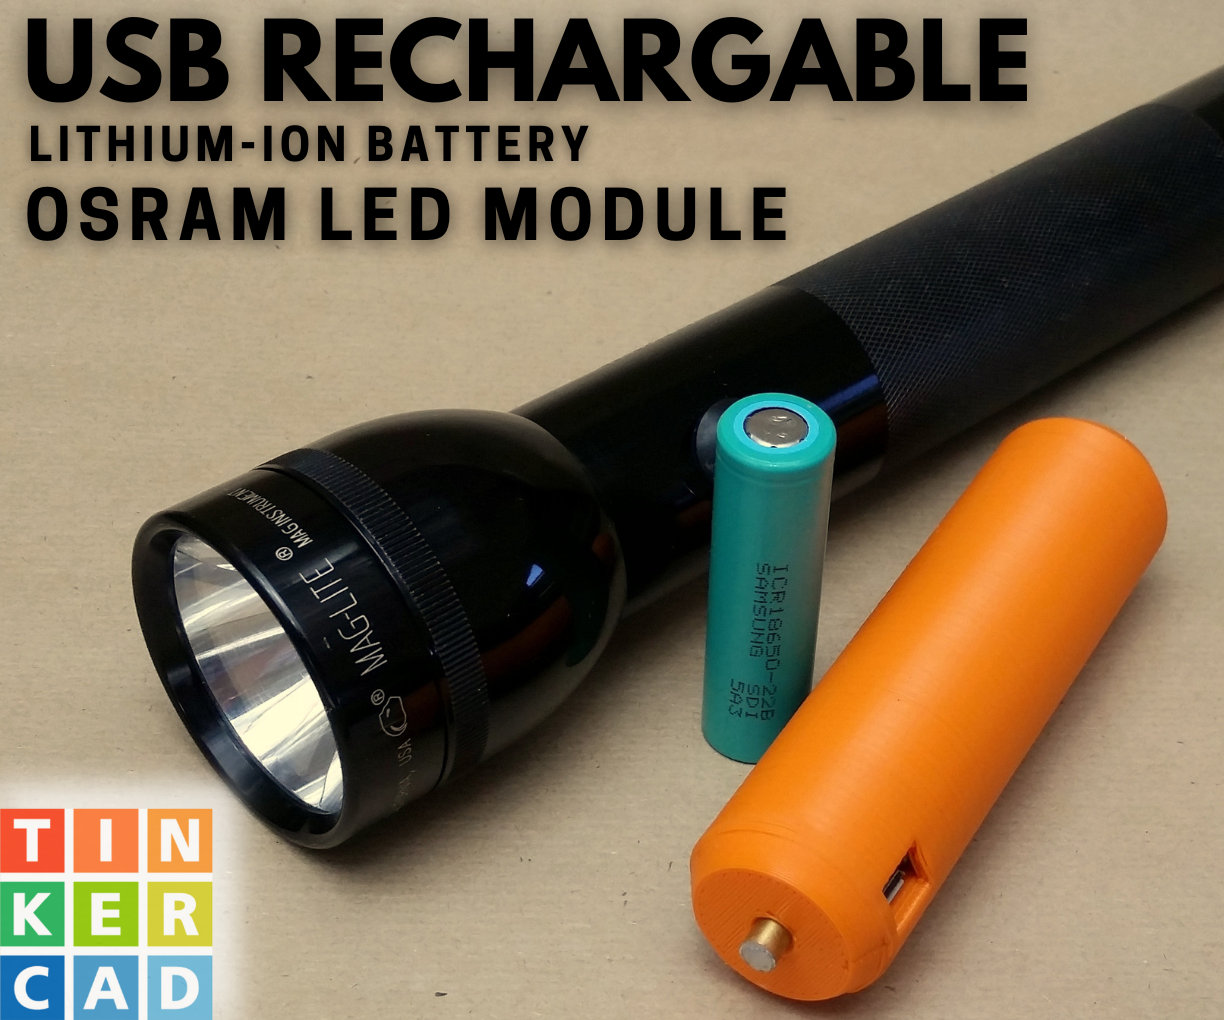 Upgrade Your Maglite With a Rechargeable Battery and LED!